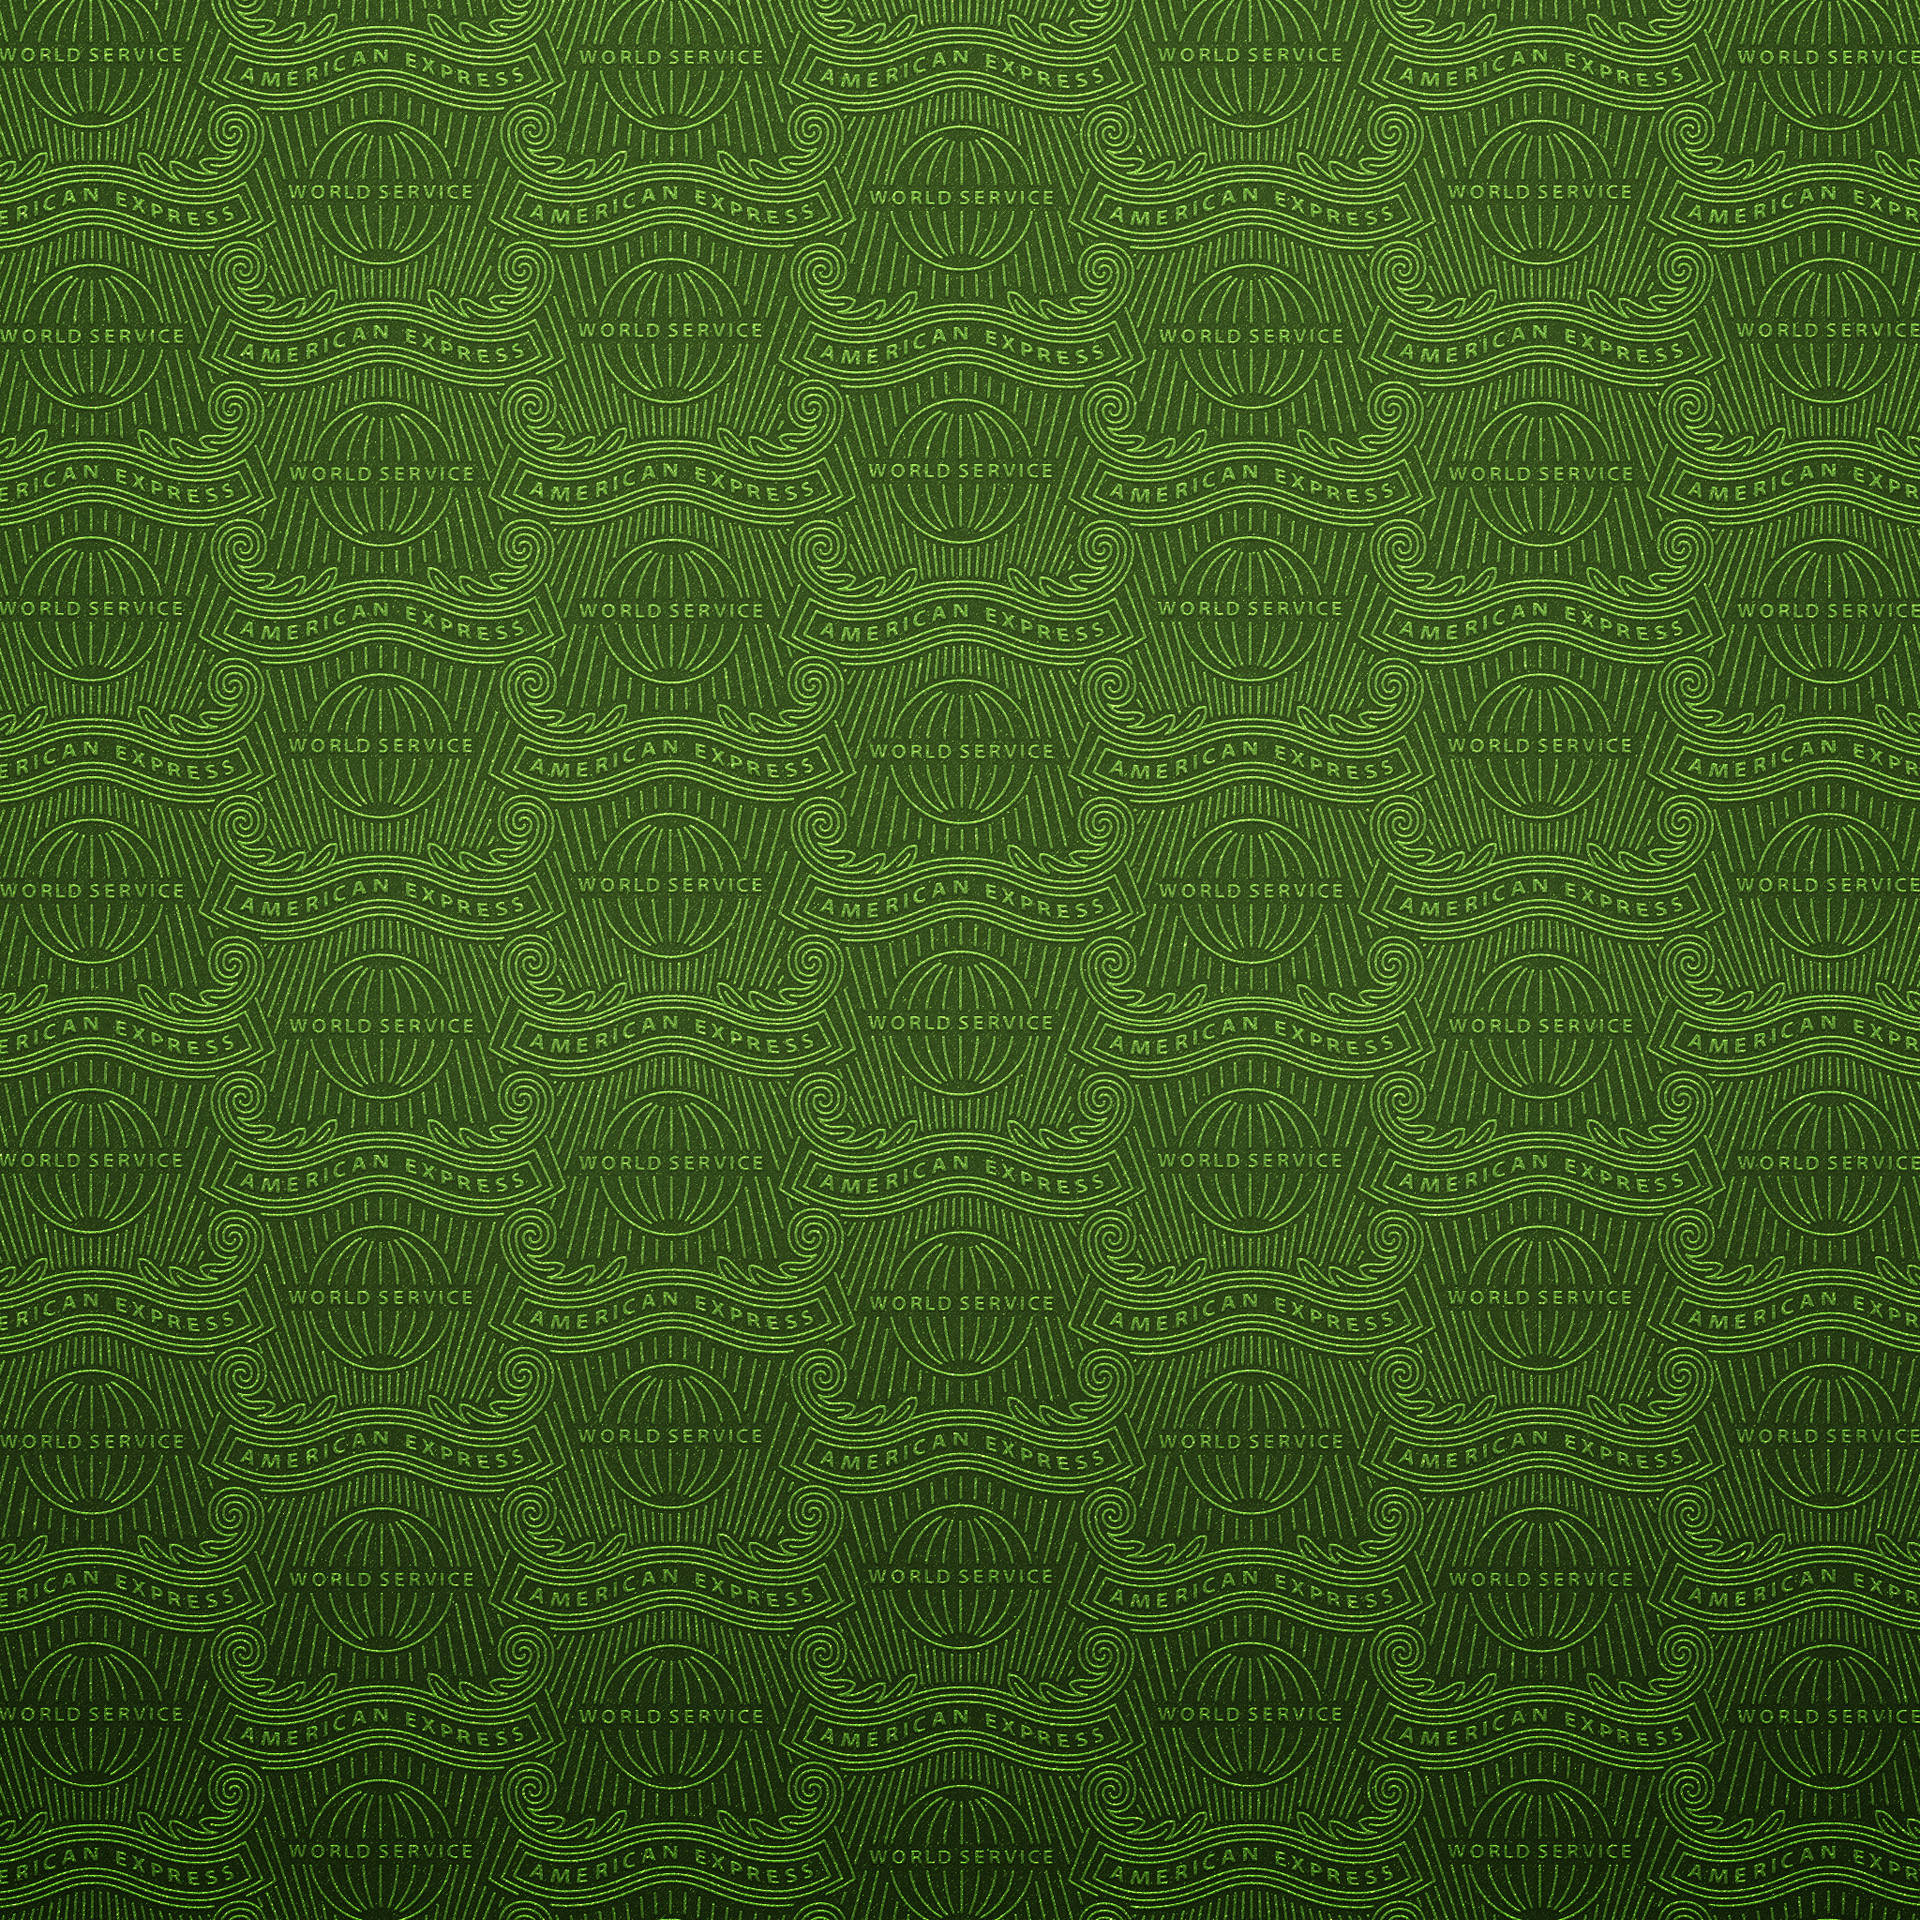 American Express Green Pattern Background